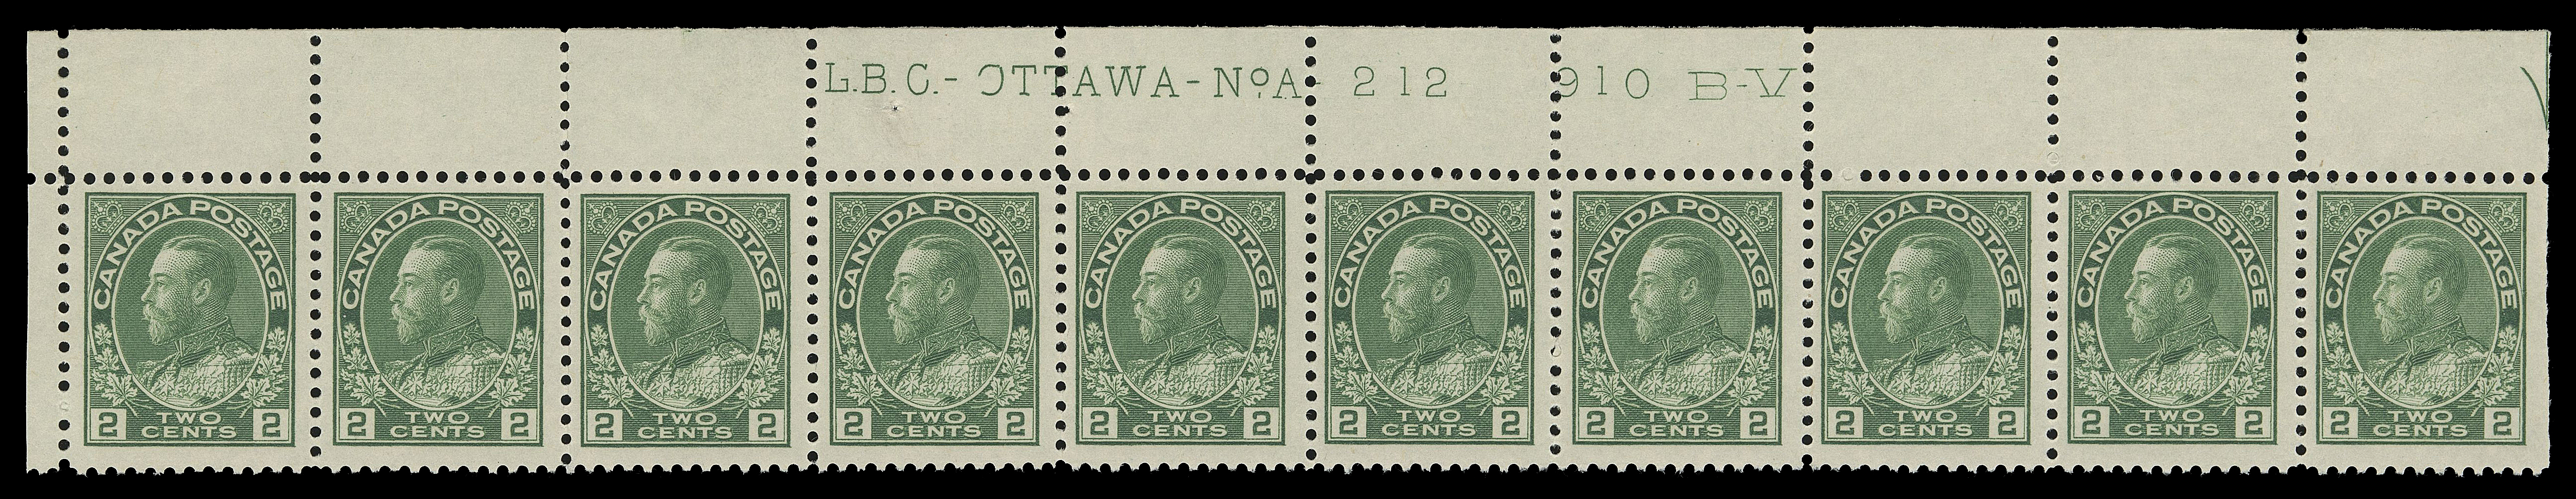 ADMIRAL STAMPS  107iv,A fresh upper left Plate 212 strip of ten, LH in selvedge leaving stamps VF NH (Unitrade cat. $900)